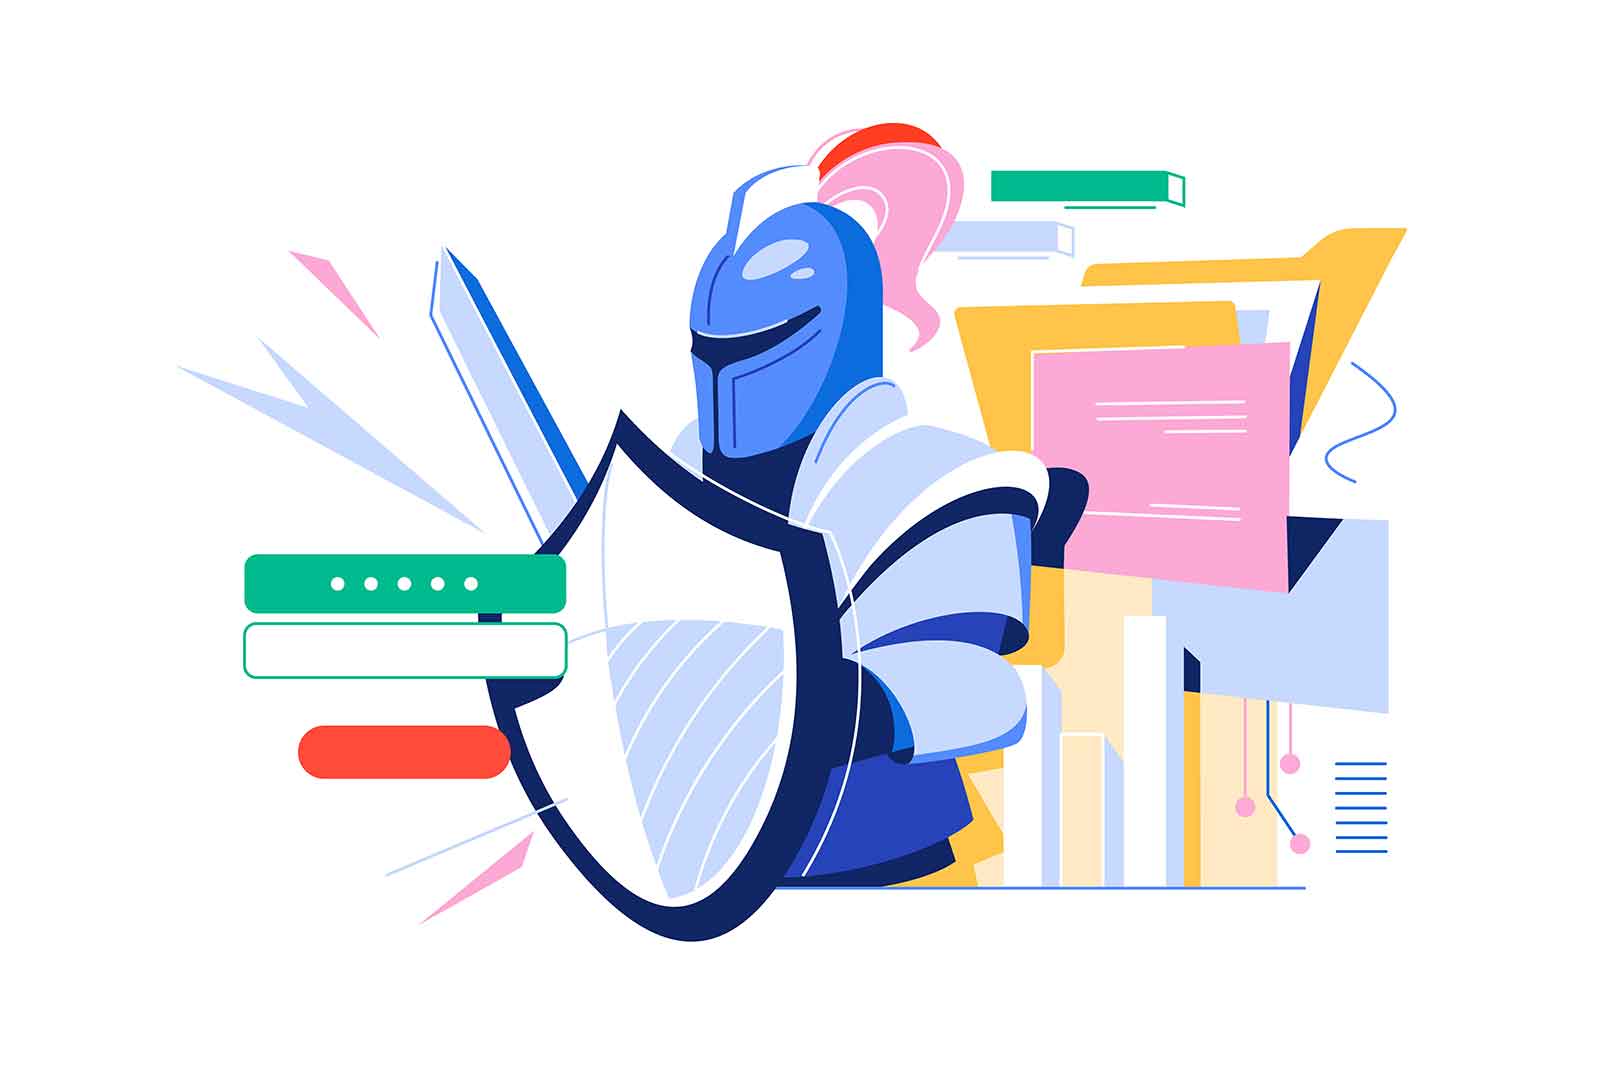 Knight in armor protect data with password, vector illustration. Knight with helmet, sword and shield in hands, stands in front of password form with documents and data behind his back. Digital security concept.